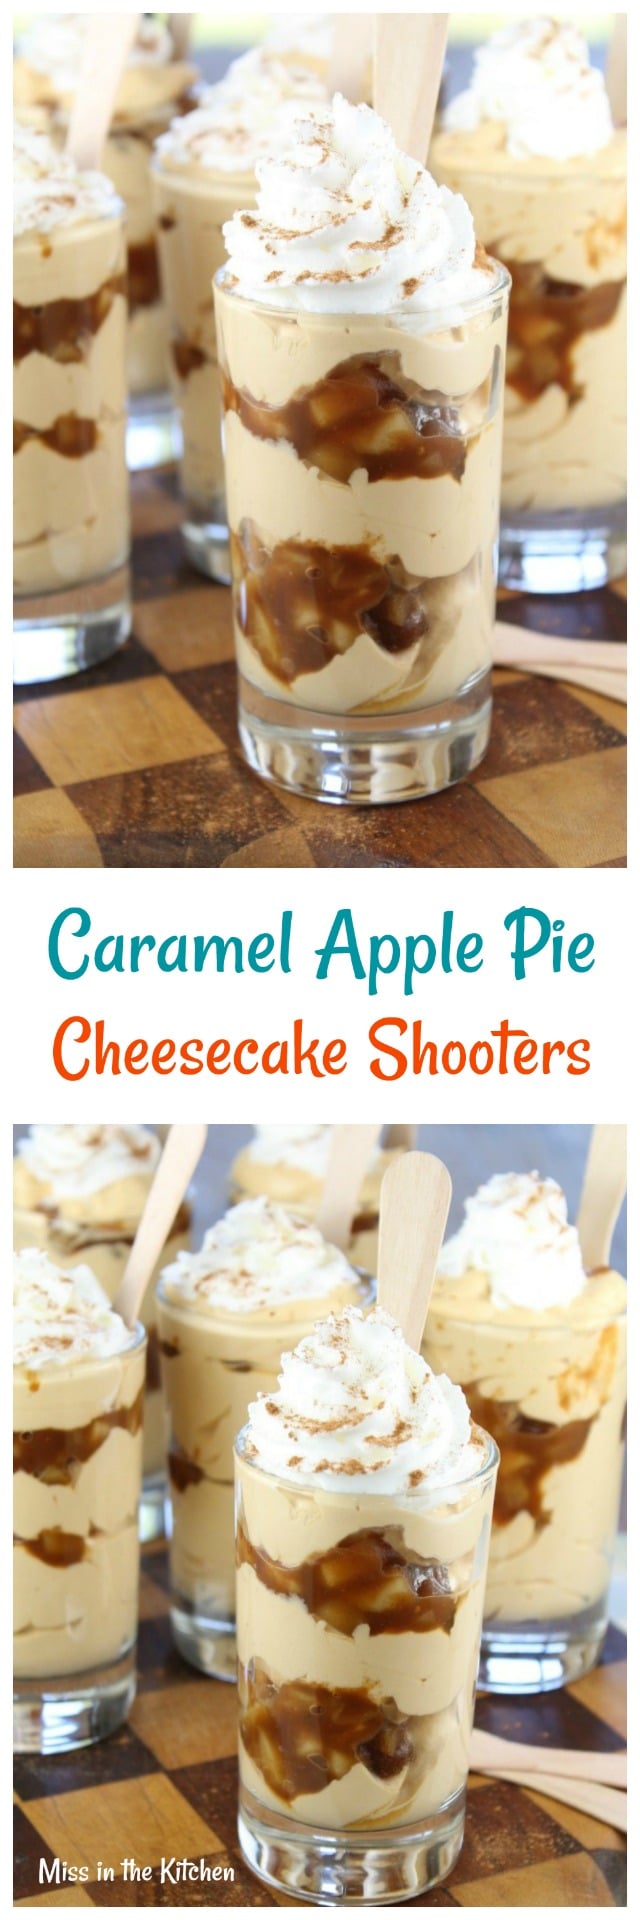 Caramel Apple Pie Cheesecake Shooters Recipe from MissintheKitchen.com #ad #AppleButterSpin @Musselmans